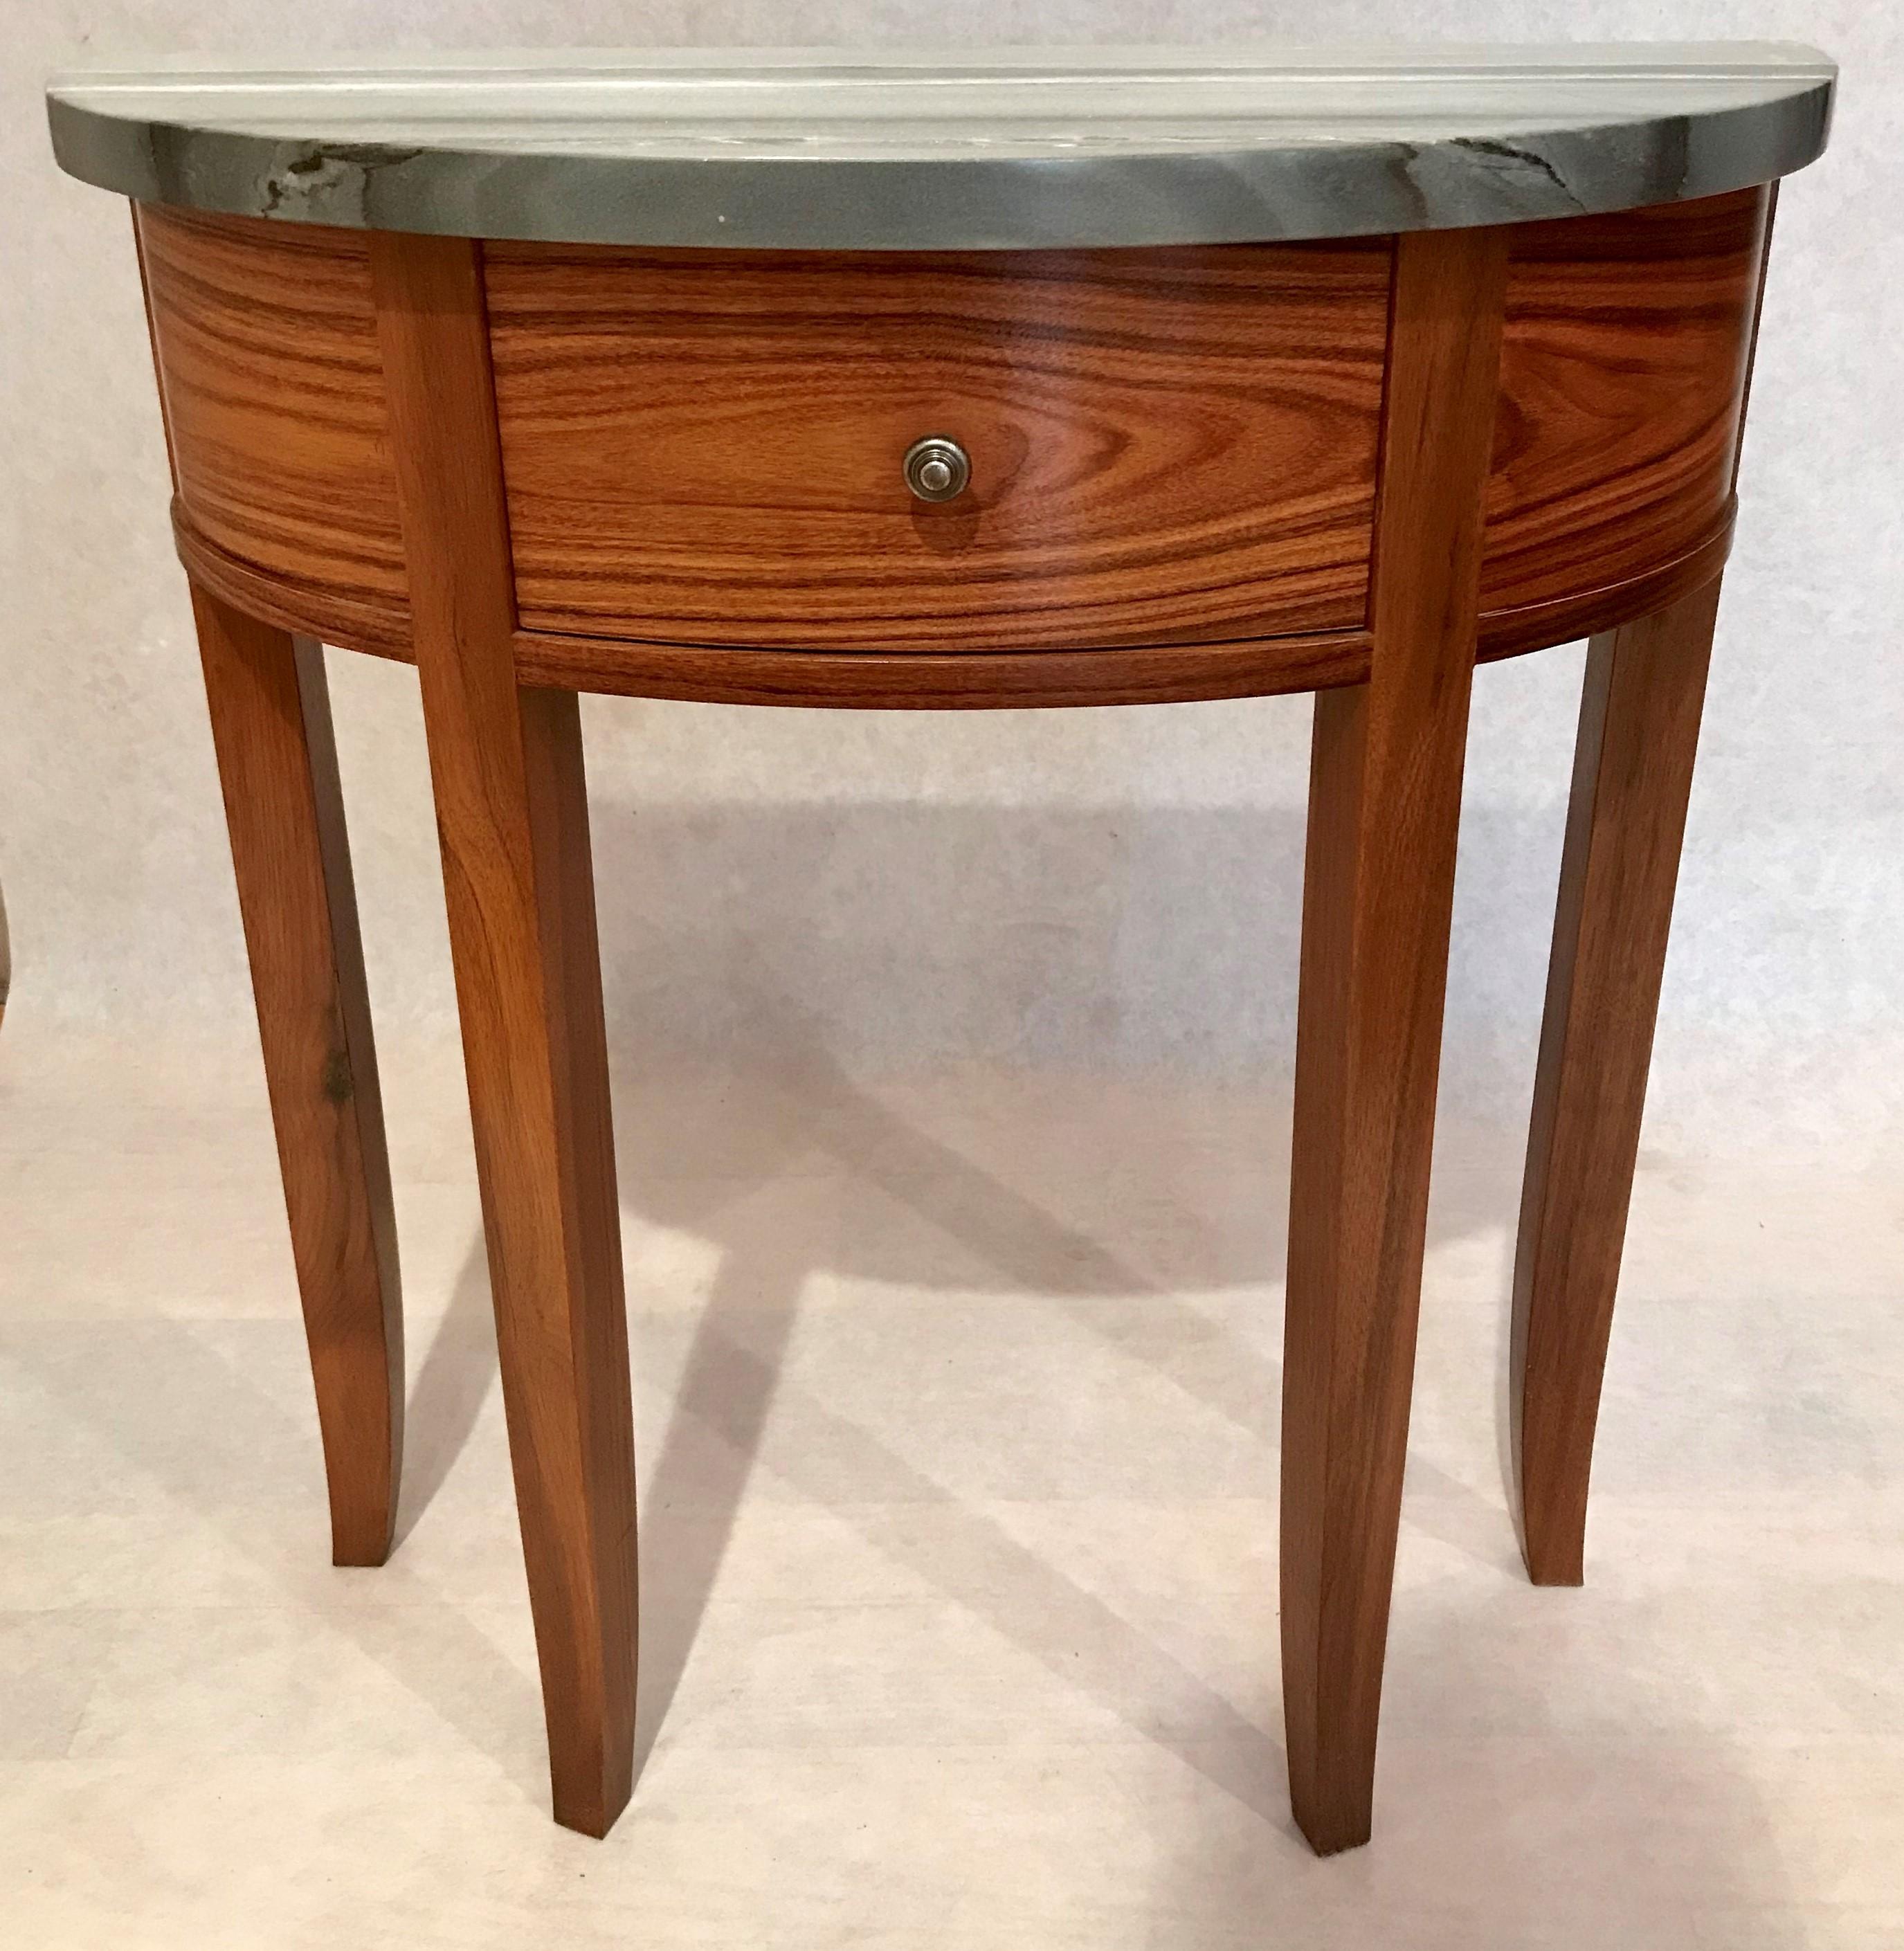 Demilune Table in Exotic Wood and Granite In Excellent Condition For Sale In Wilton, CT